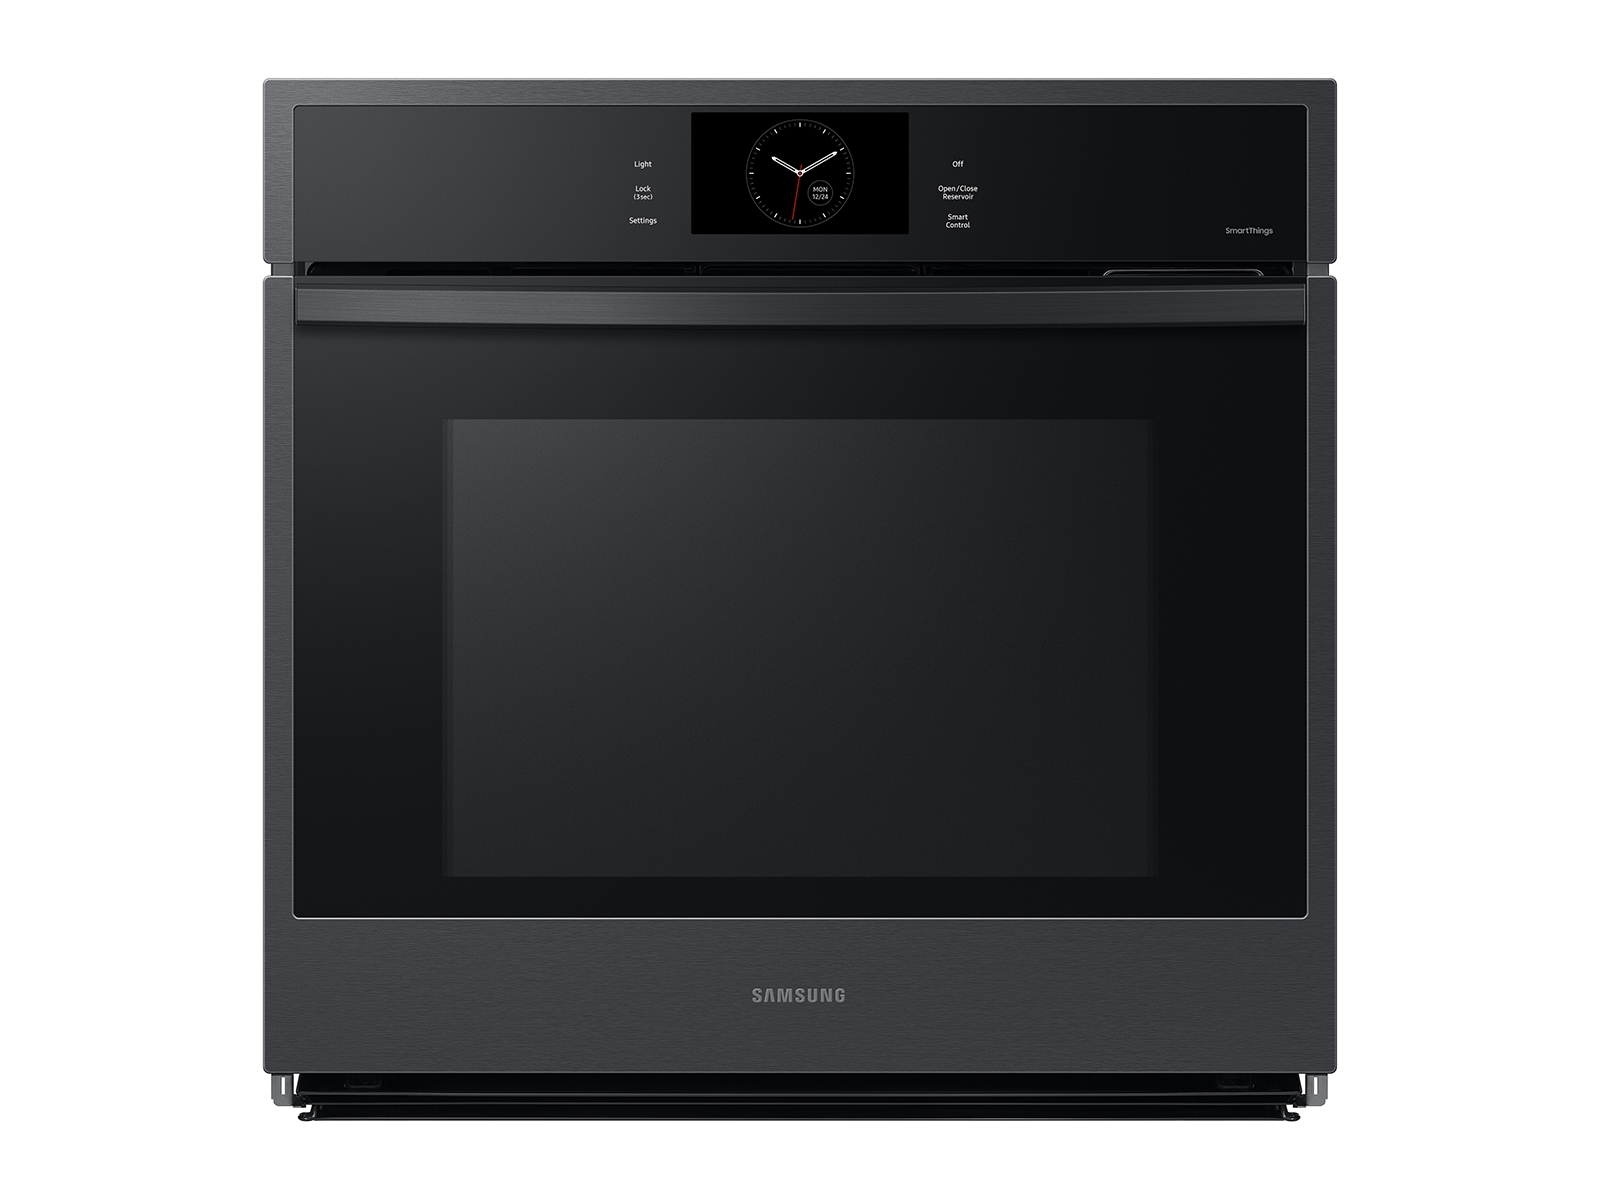 Samsung 30" Single Wall Oven with Steam Cook in Matte in Black(NV51CG600SMTAA)